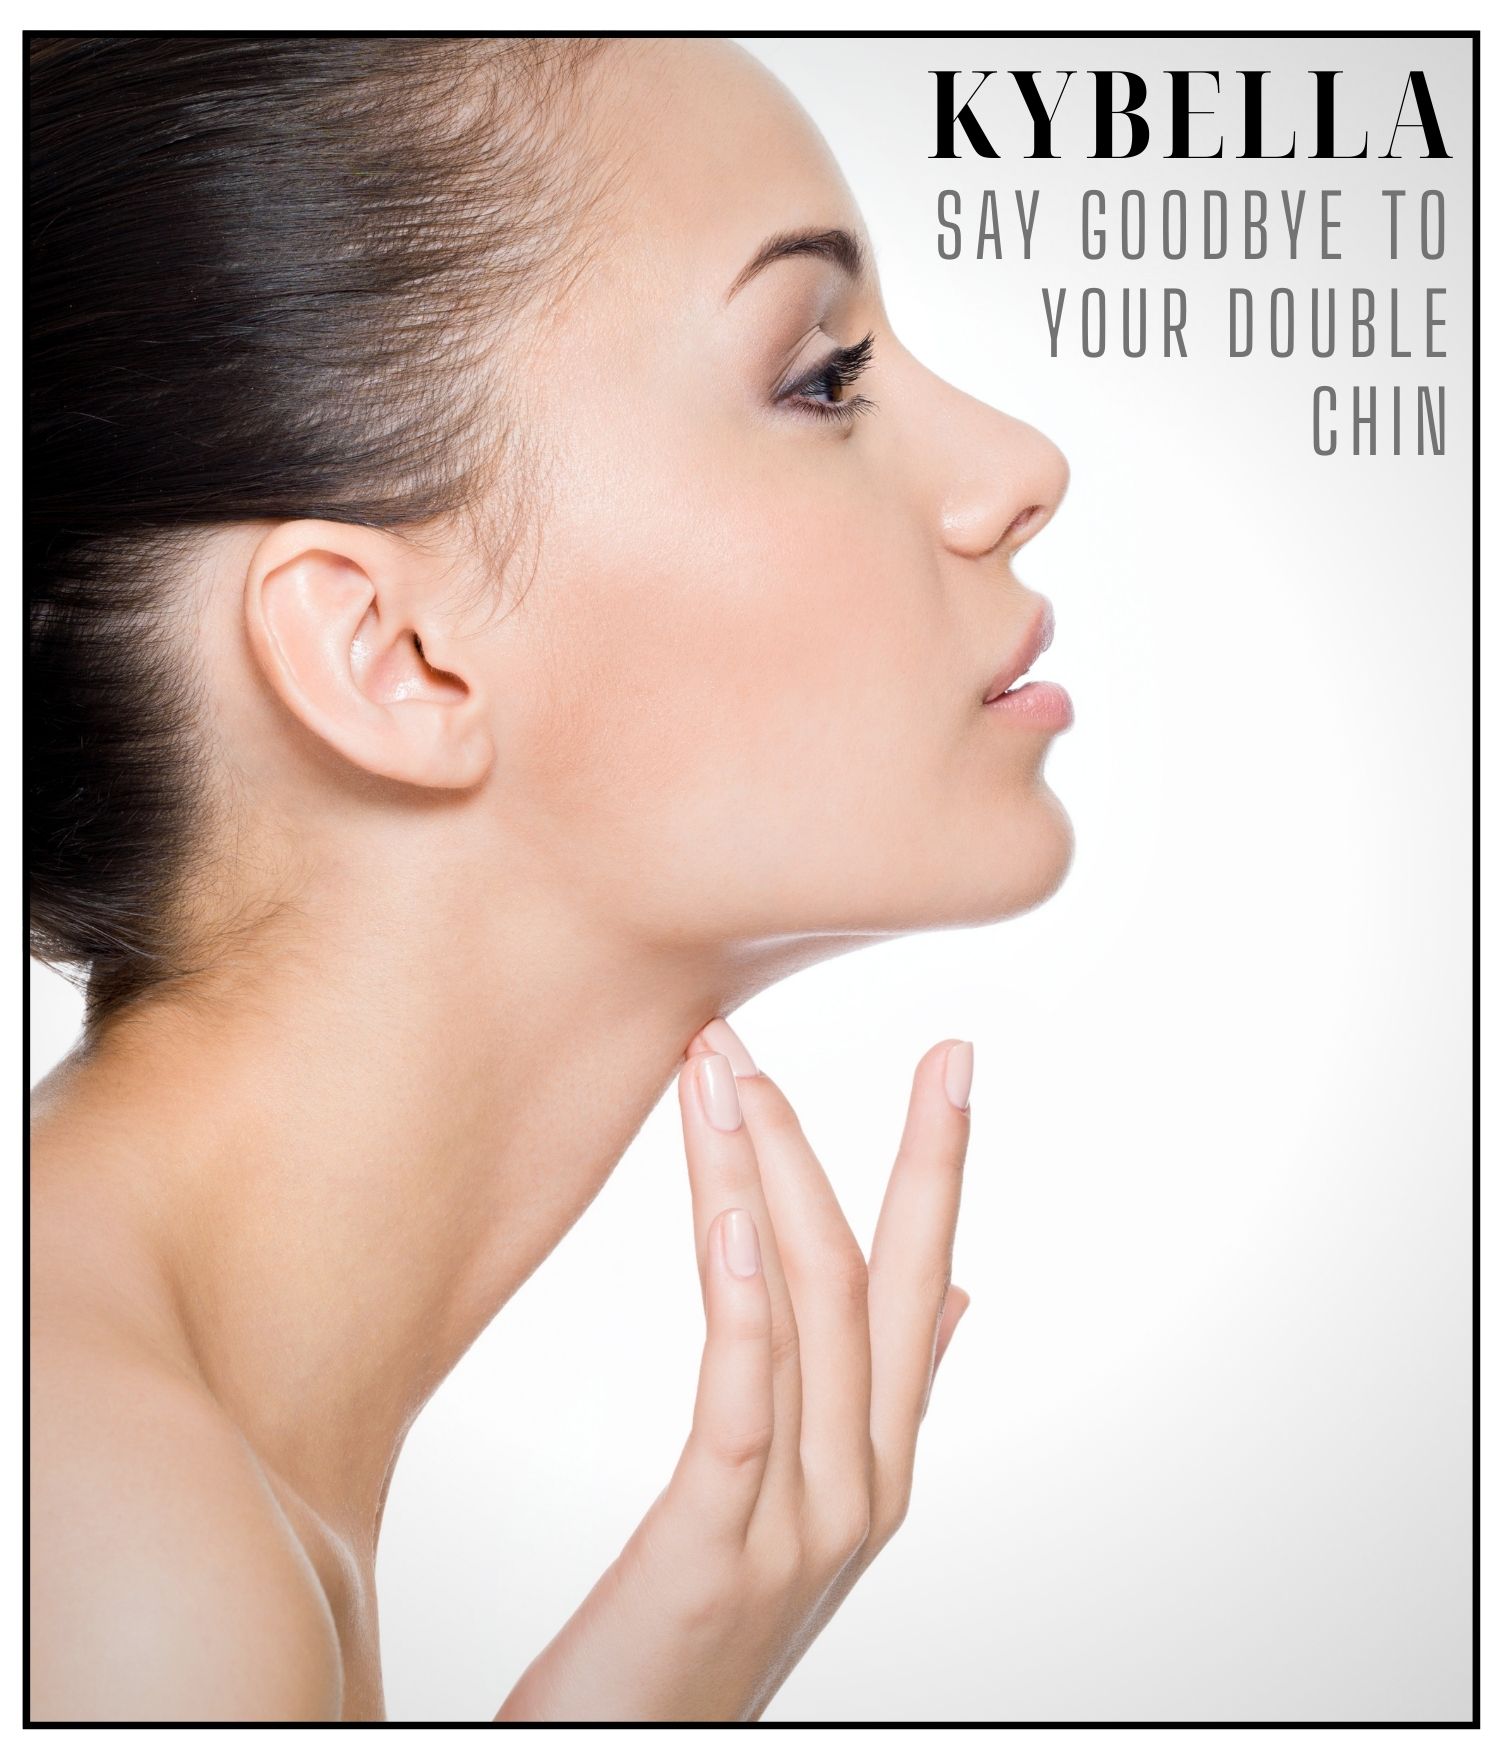 Woman touches her skin with words saying: Kybellla | say goodbye to double chin, offered at SkinSuite RX.